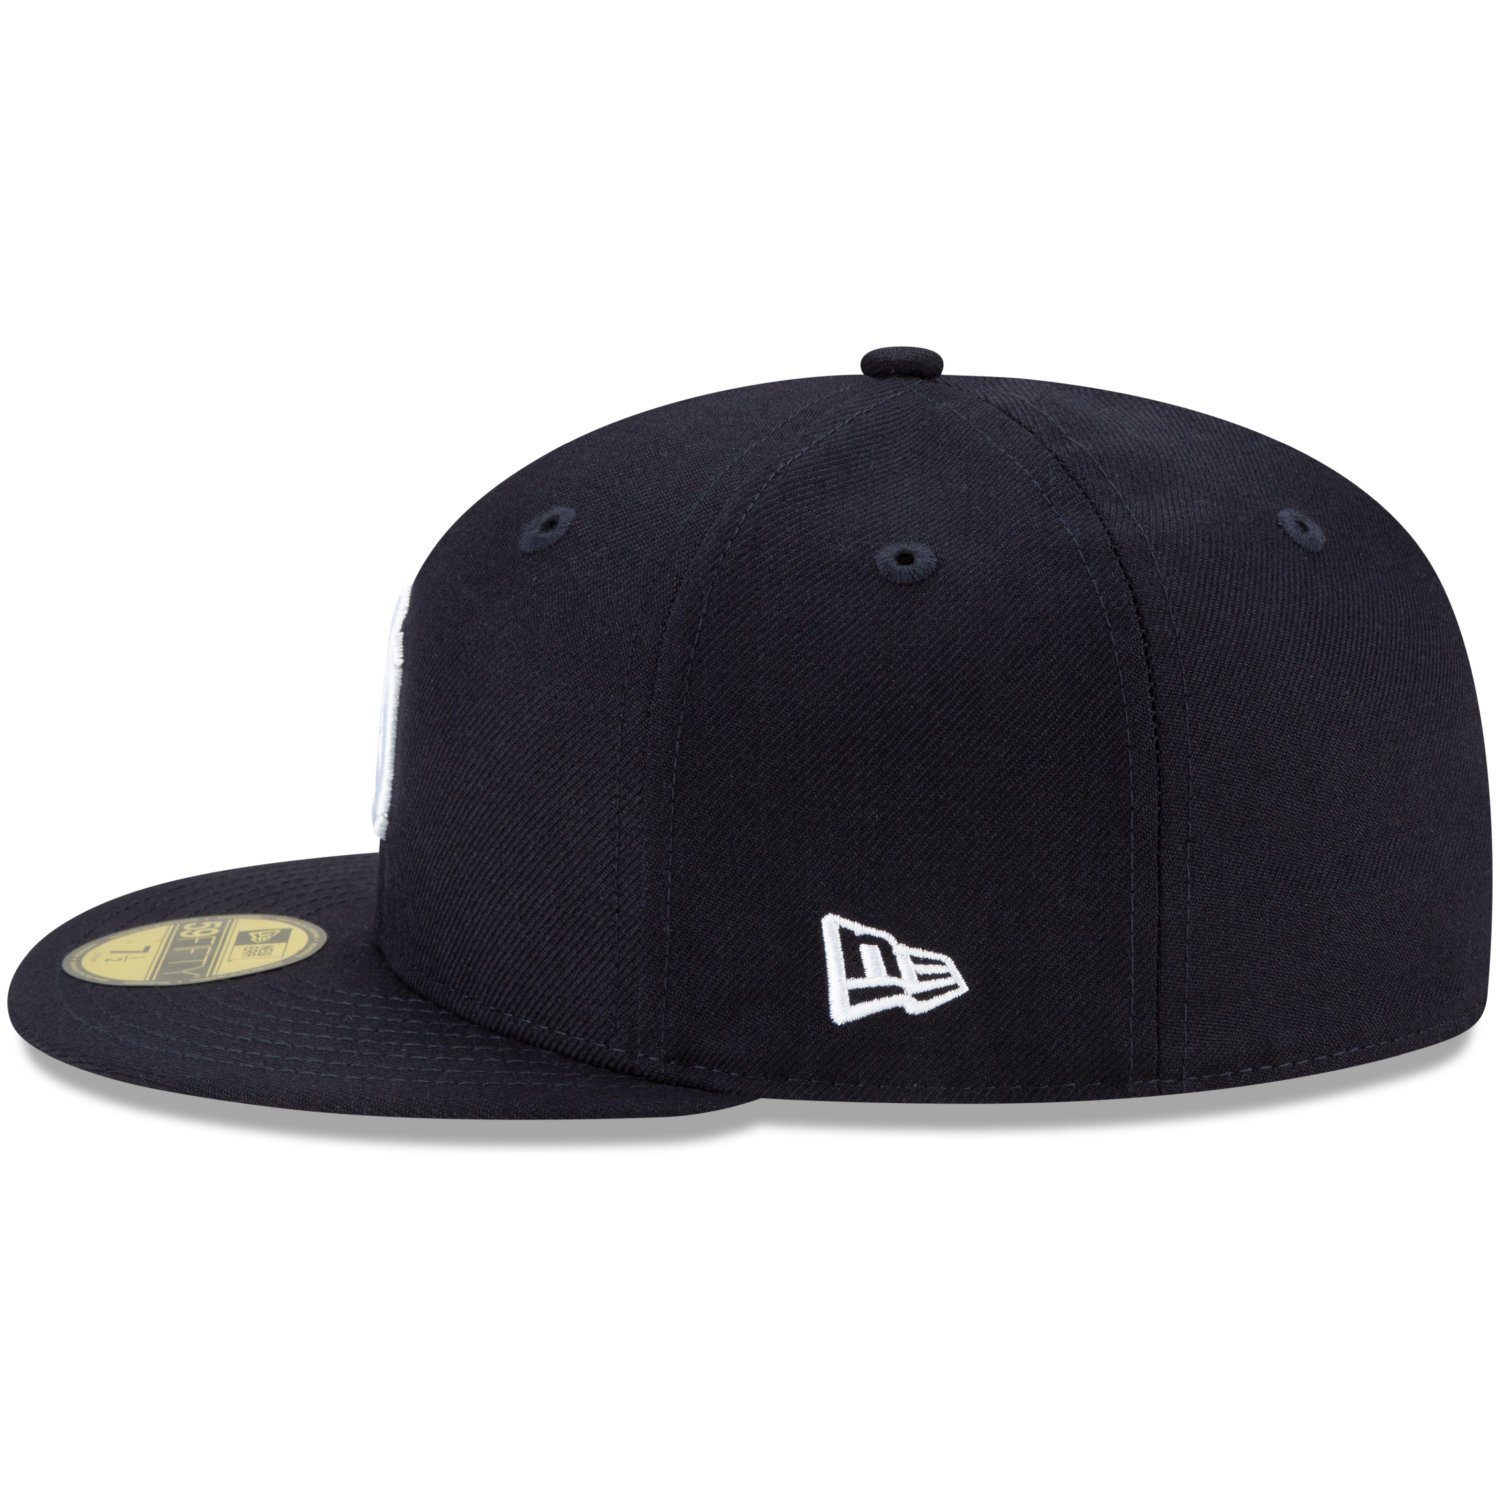 New Era Fitted Cap 59Fifty LIFESTYLE York Yankees New